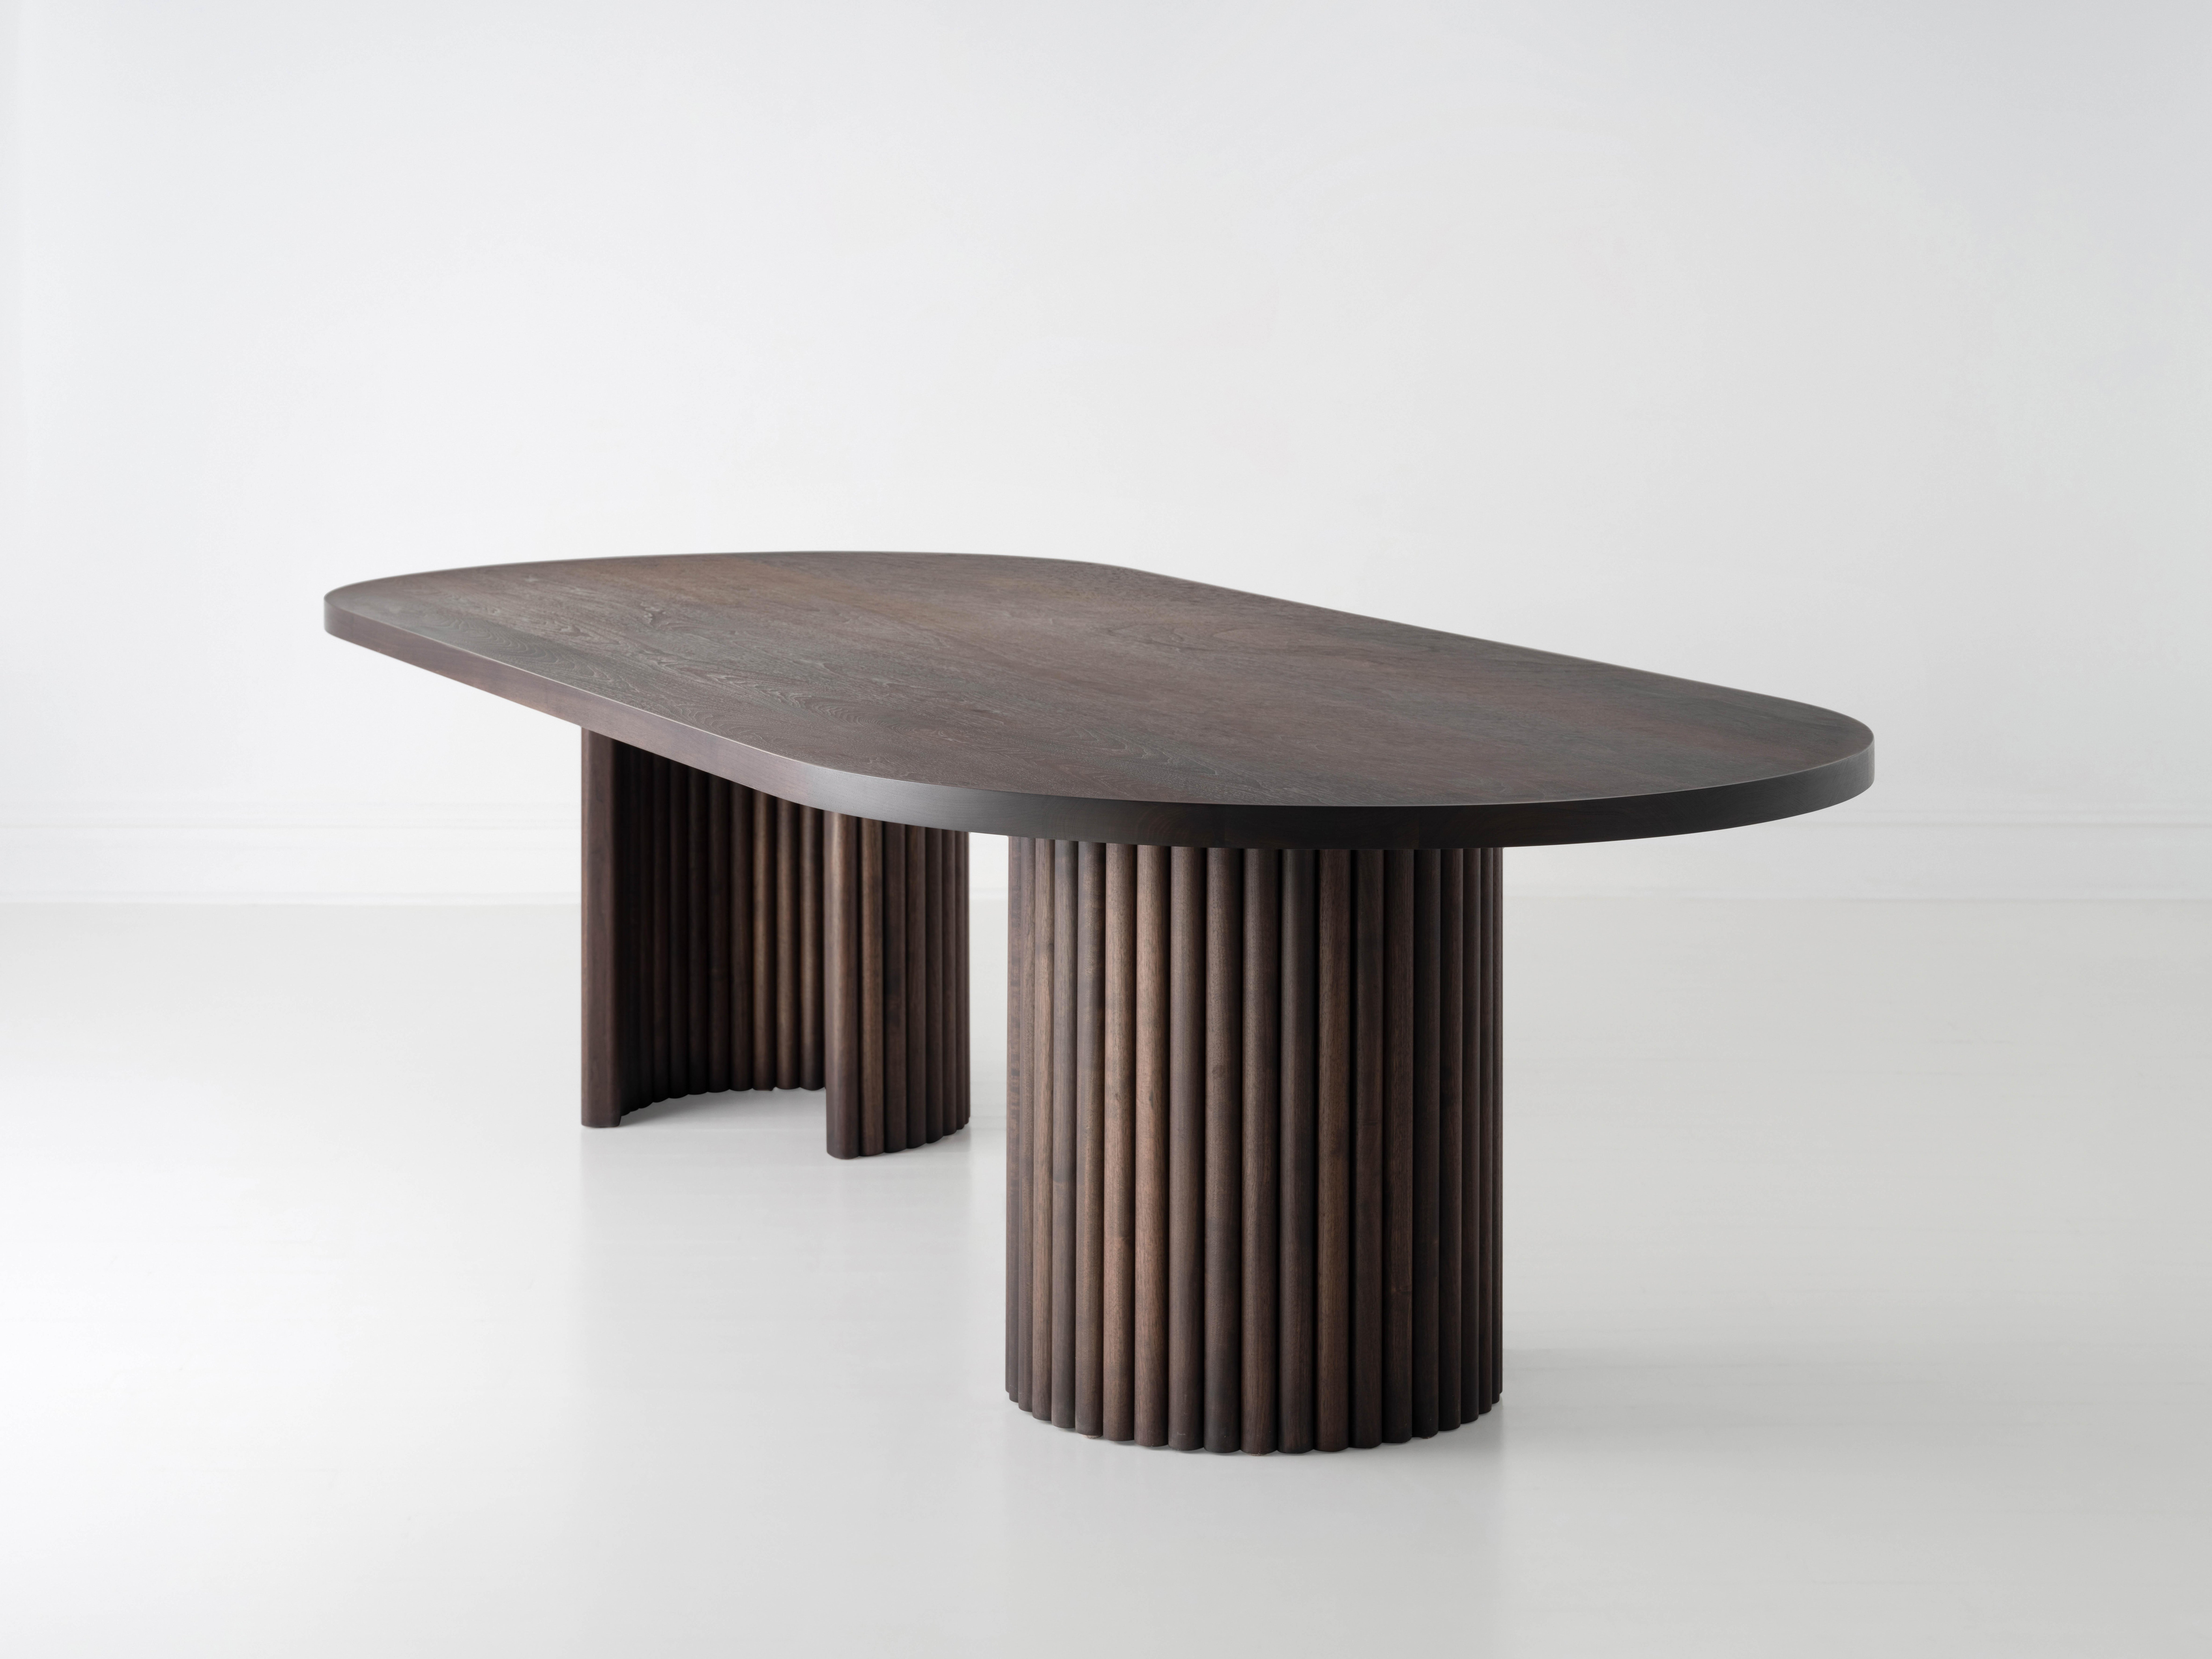 Unapologetically bold, Kate Duncan's dining table is a statement piece that pays homage to both a contemporary aesthetic as well as brutalist architecture. Large columns of coopered splines and a hefty solid wood top create a table you just can’t